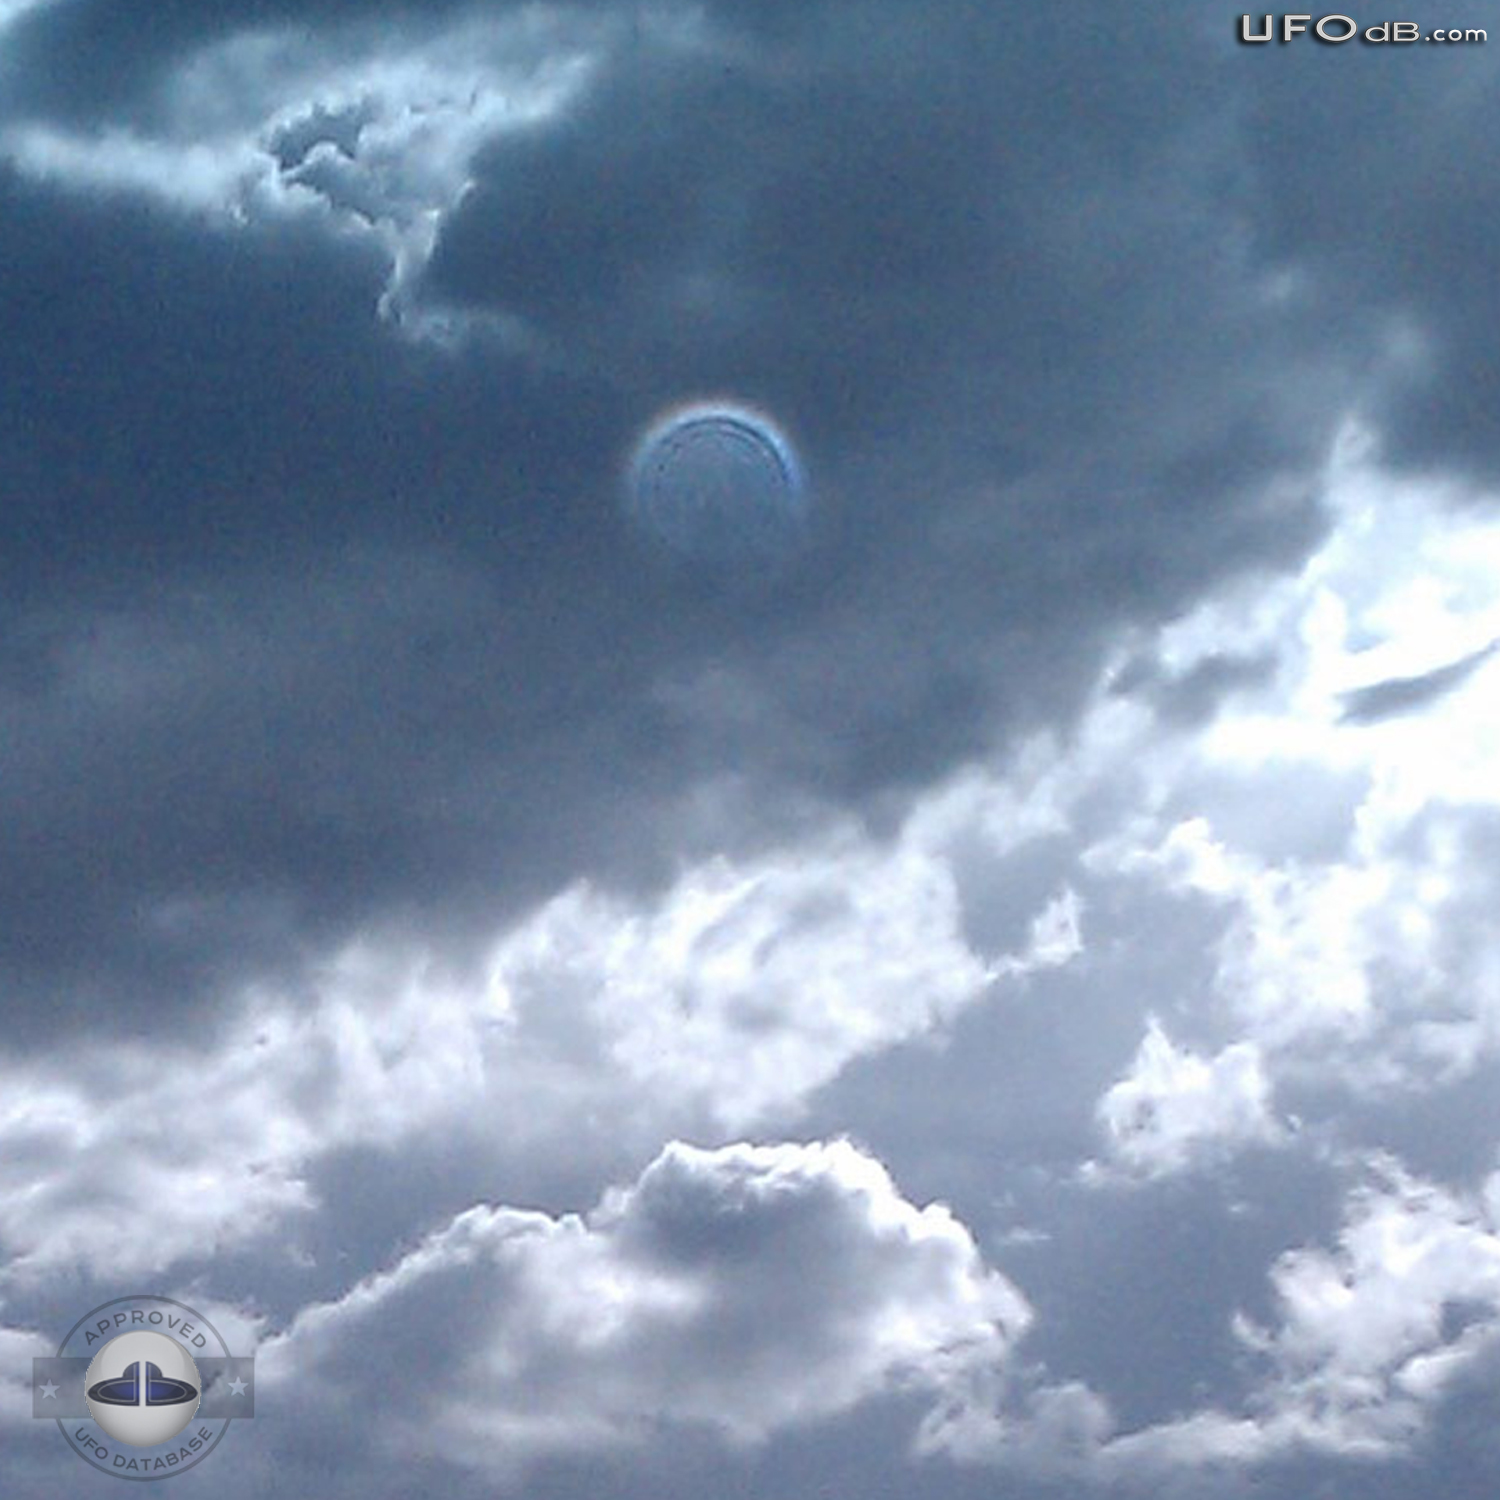 Large UFO coming through a Cloud in Las Vegas Nevada USA | May 13 2011 UFO Picture #334-4